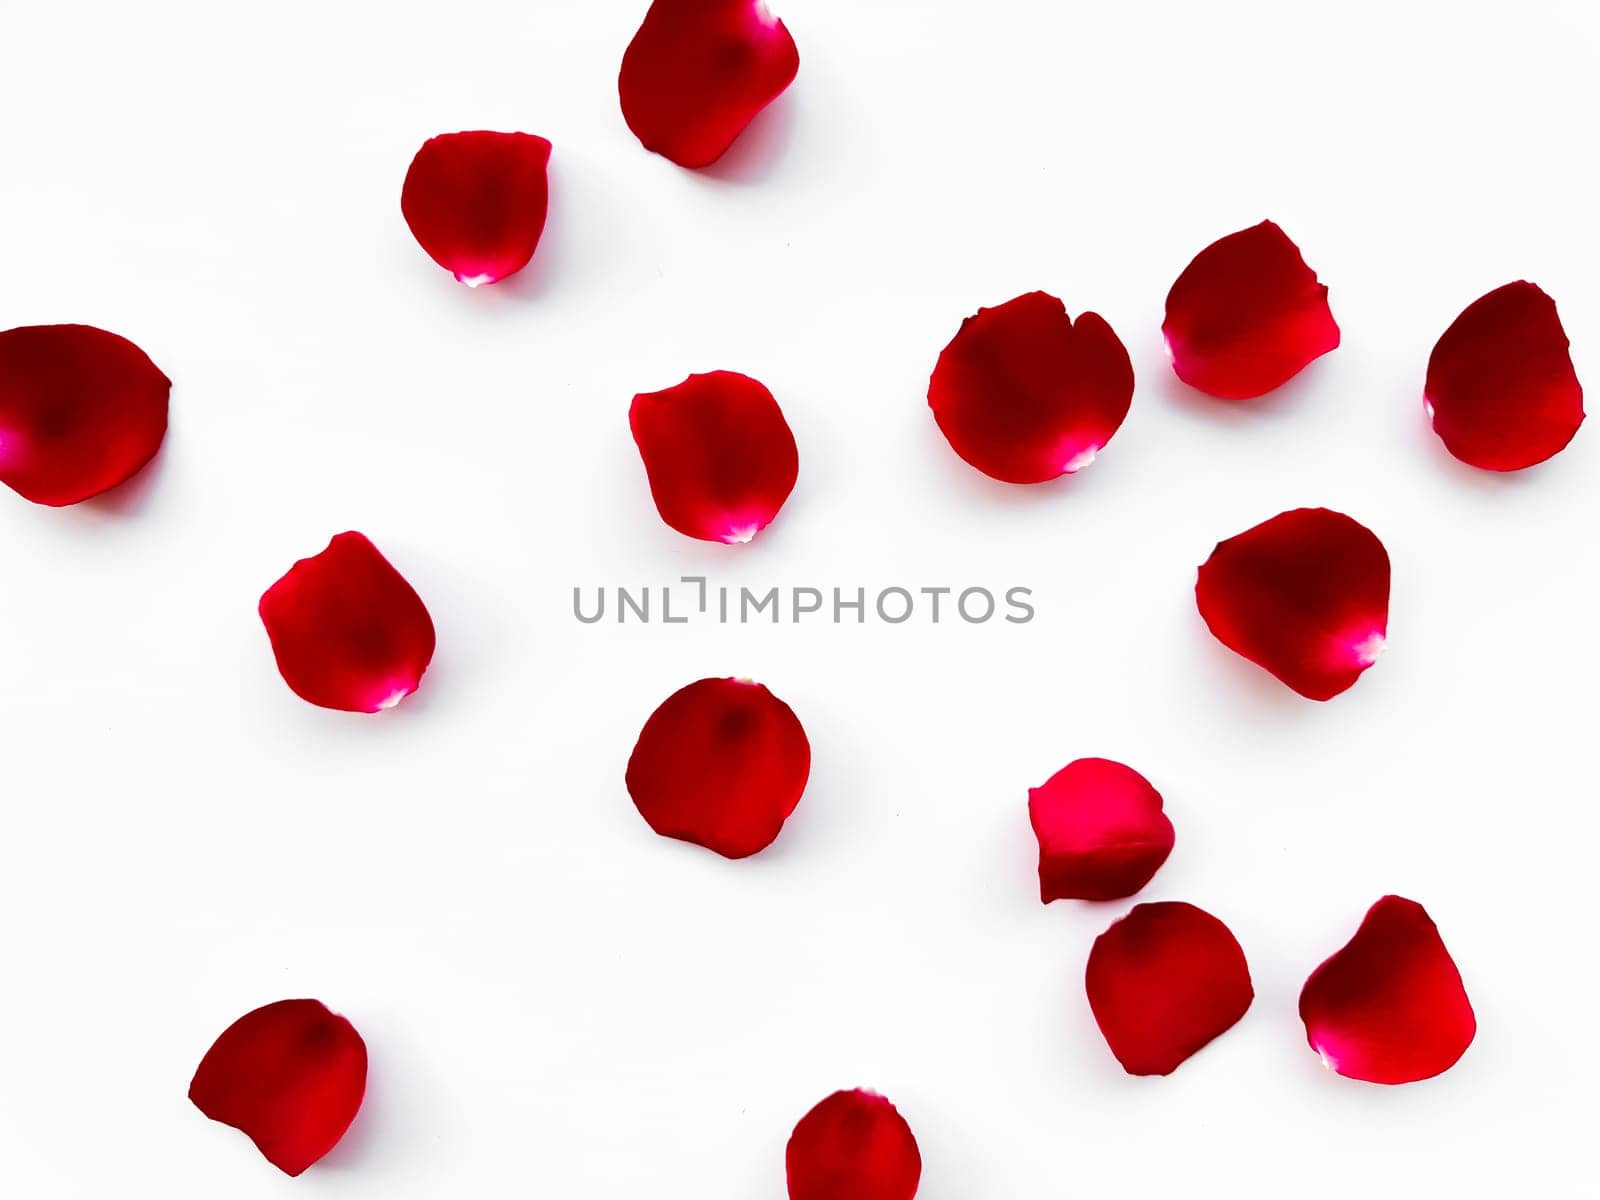 Scattered red rose petals isolated on white background. Flat lay, top view. Romantic concept for design and decoration. Can be used for romantic event decorations, wedding invitations, greeting cards and in cosmetics and perfumery advertising. by Lunnica